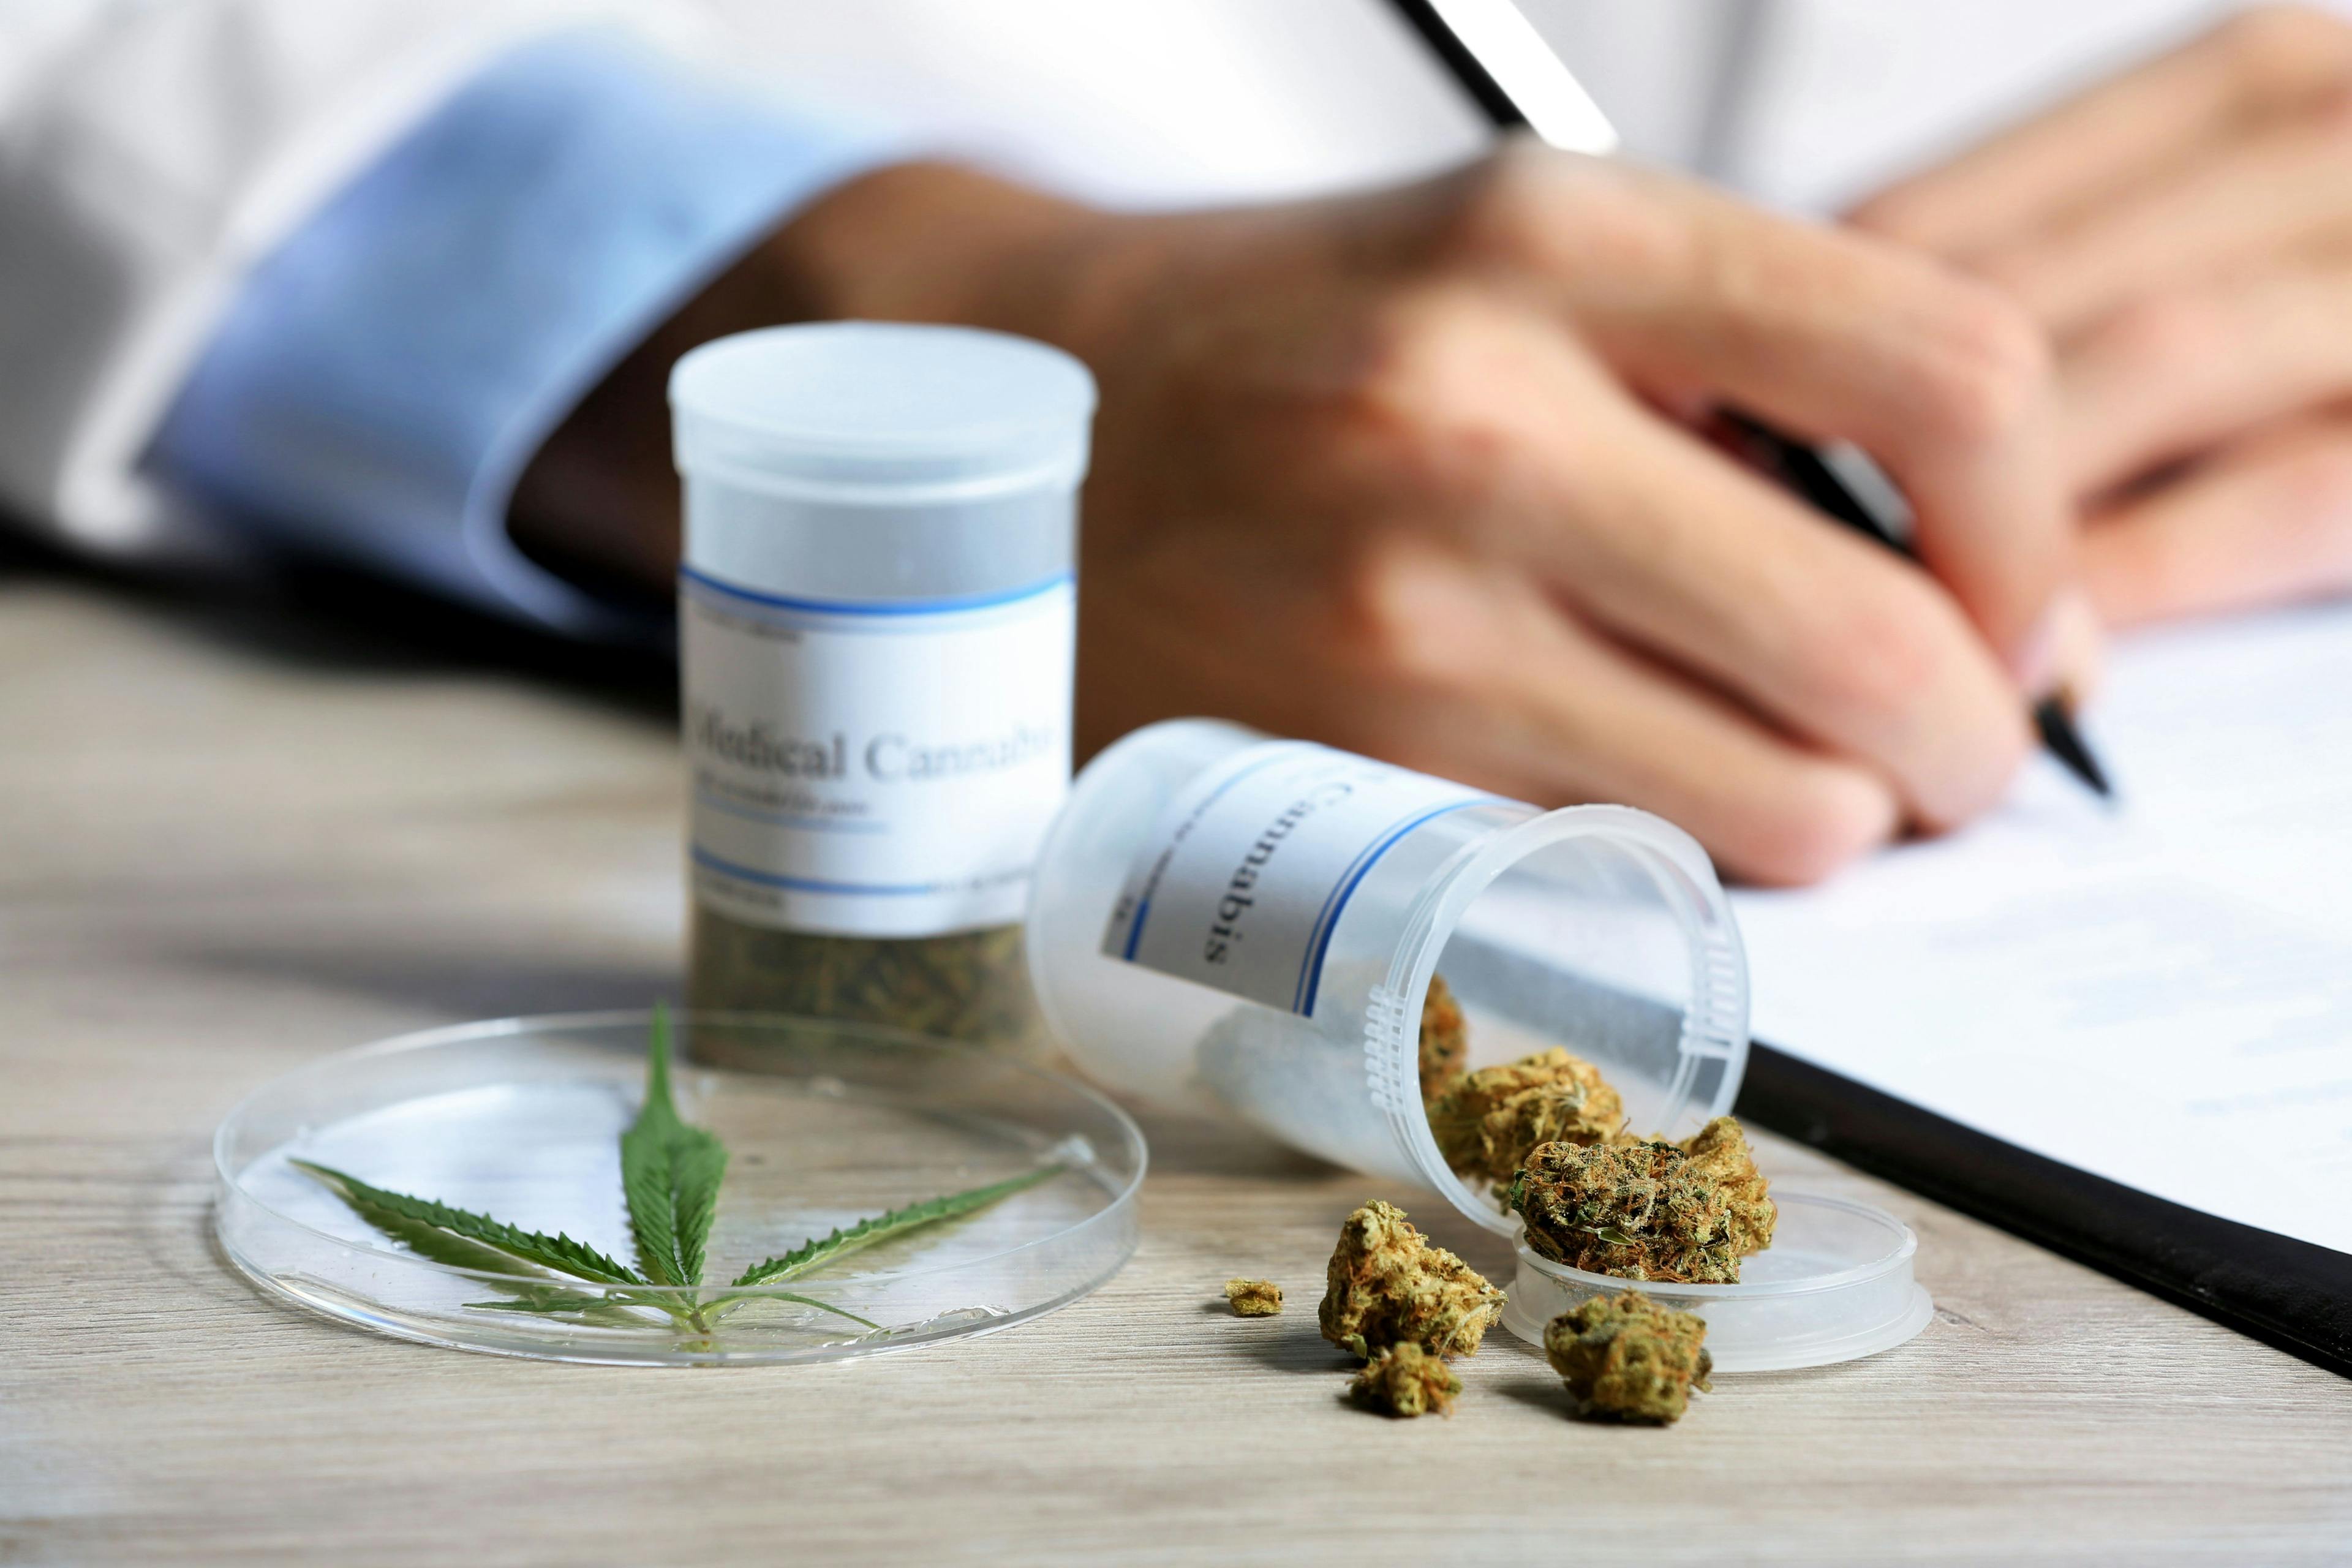 Medical Cannabis Associated With Improvements in Health-Related Quality of Life